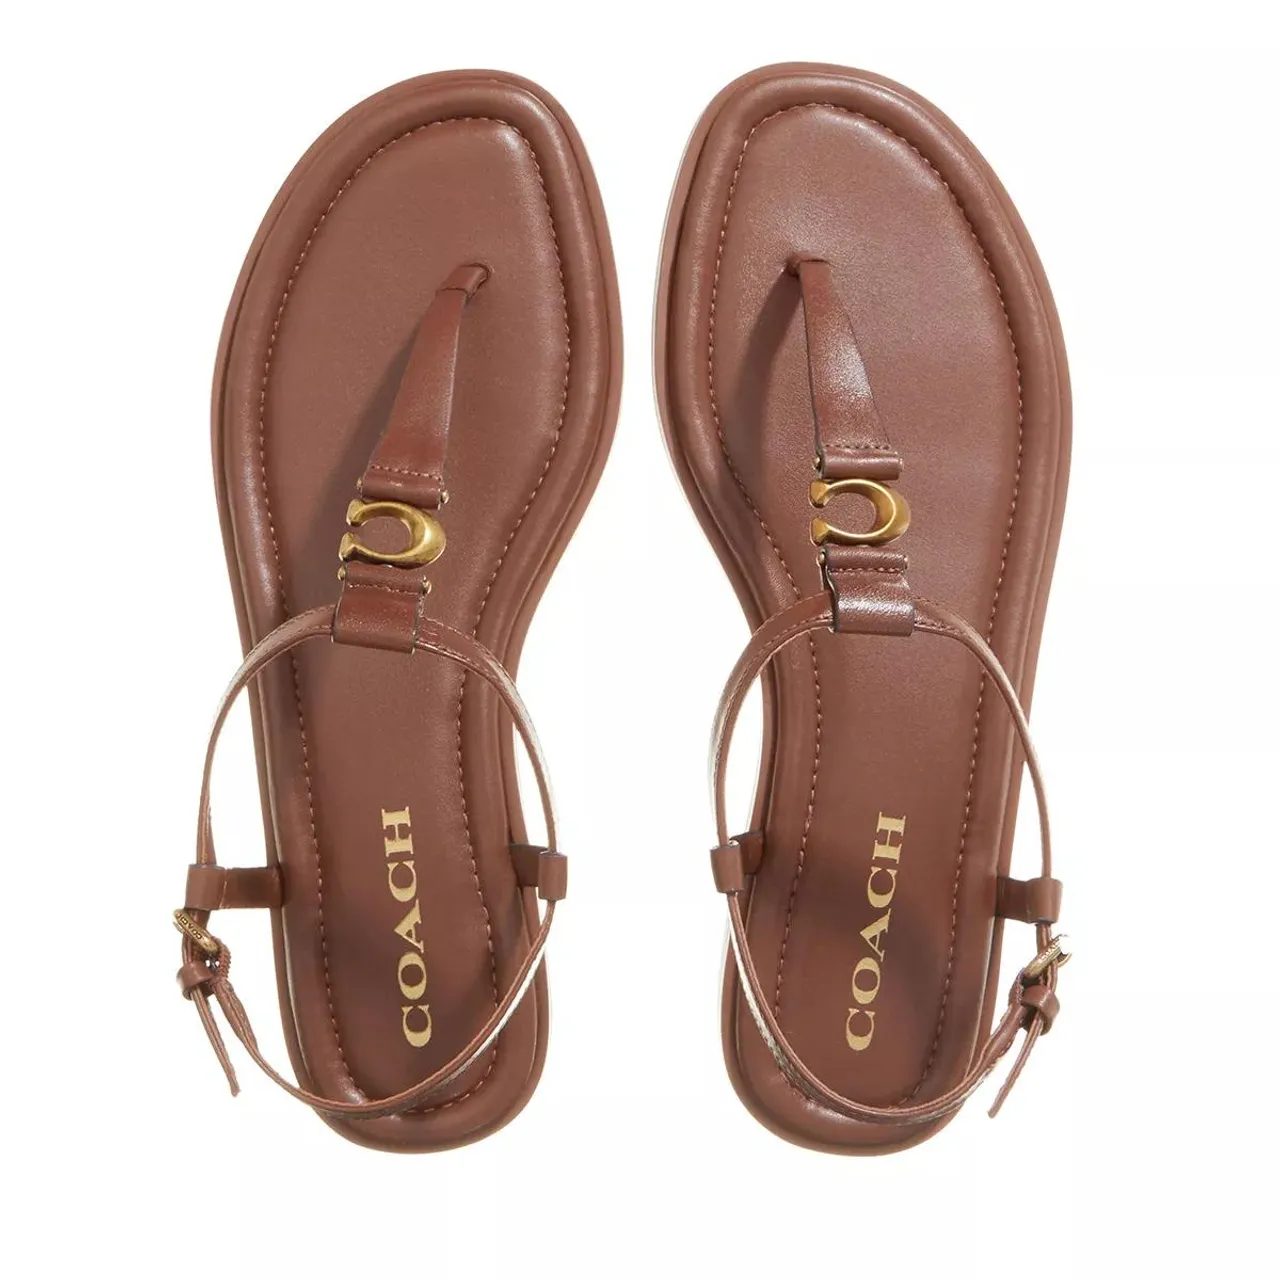 Coach Sandals - Jessica Sandal Leather - brown - Sandals for ladies